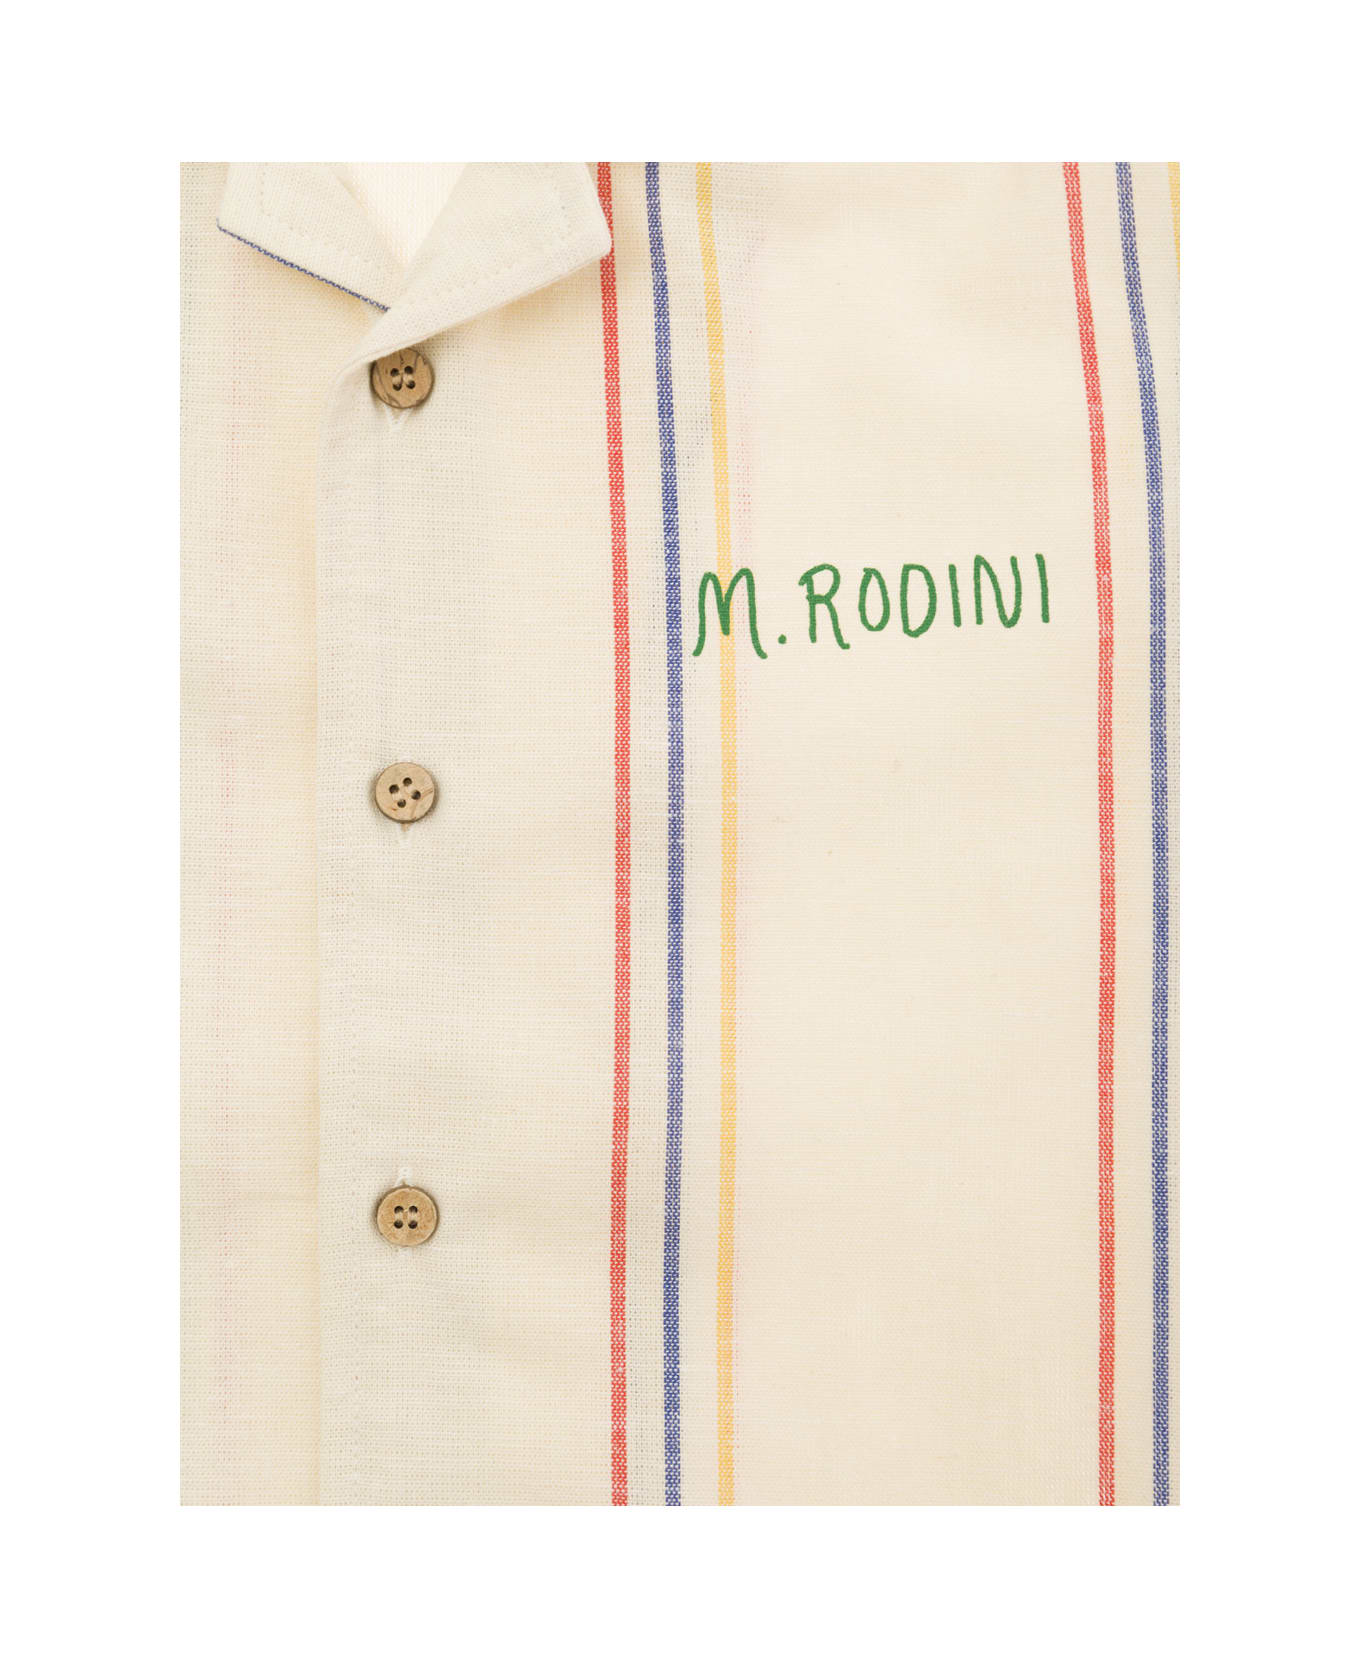 Mini Rodini Beige Striped Shirt With Embroidered Logo In Cotton Boy - Beige